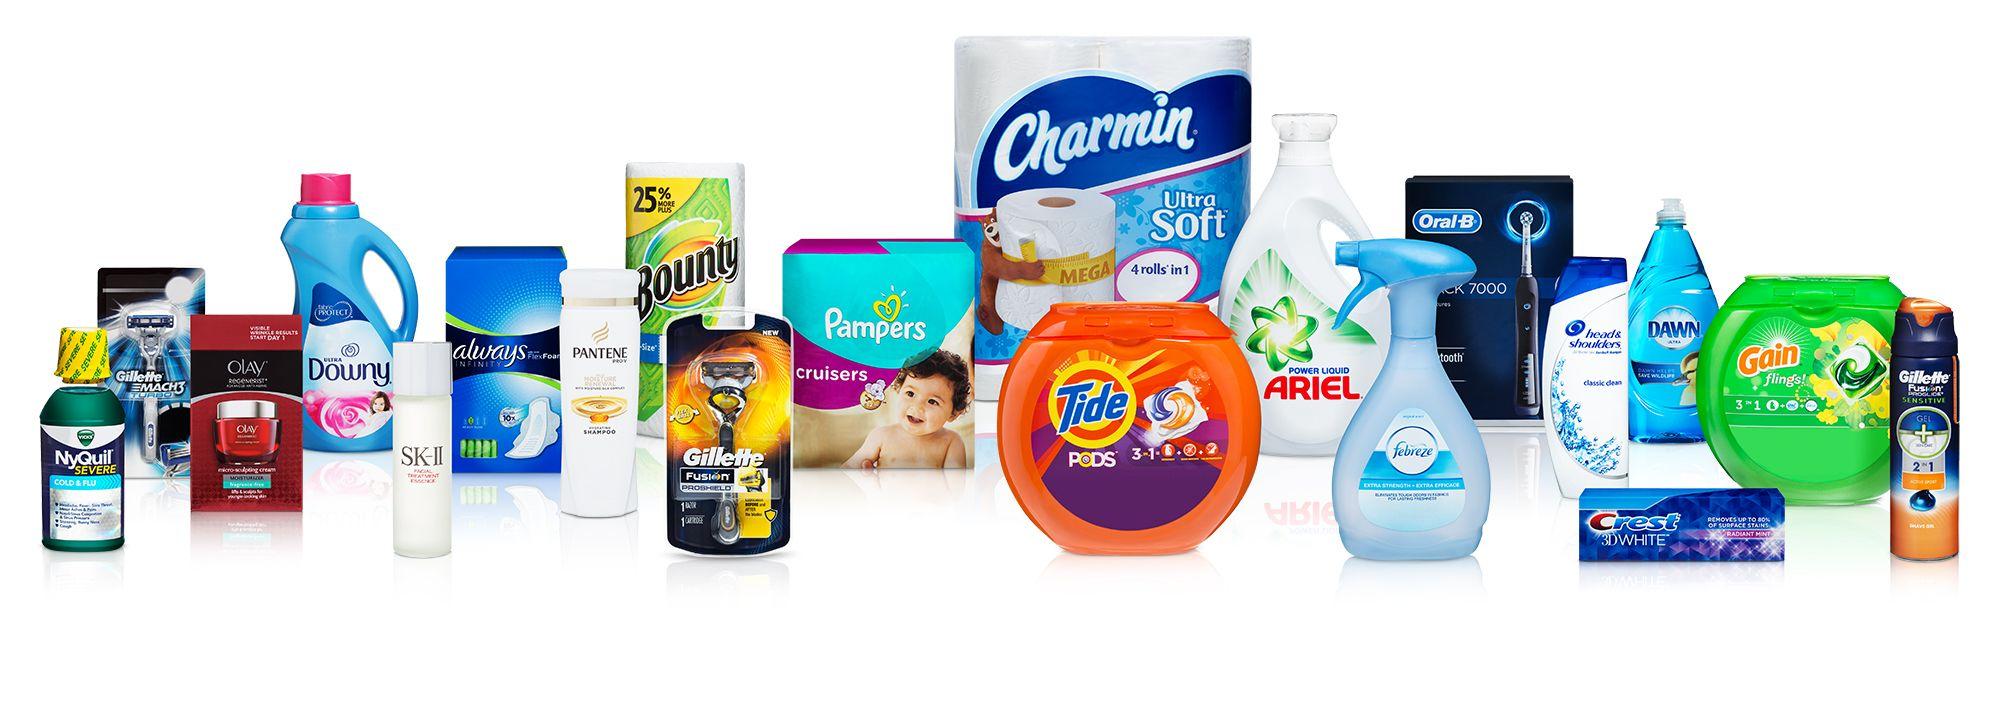 Procter and Gamble Brand Logo - 2 Reasons To Not Buy Procter & Gamble Stock -- The Motley Fool